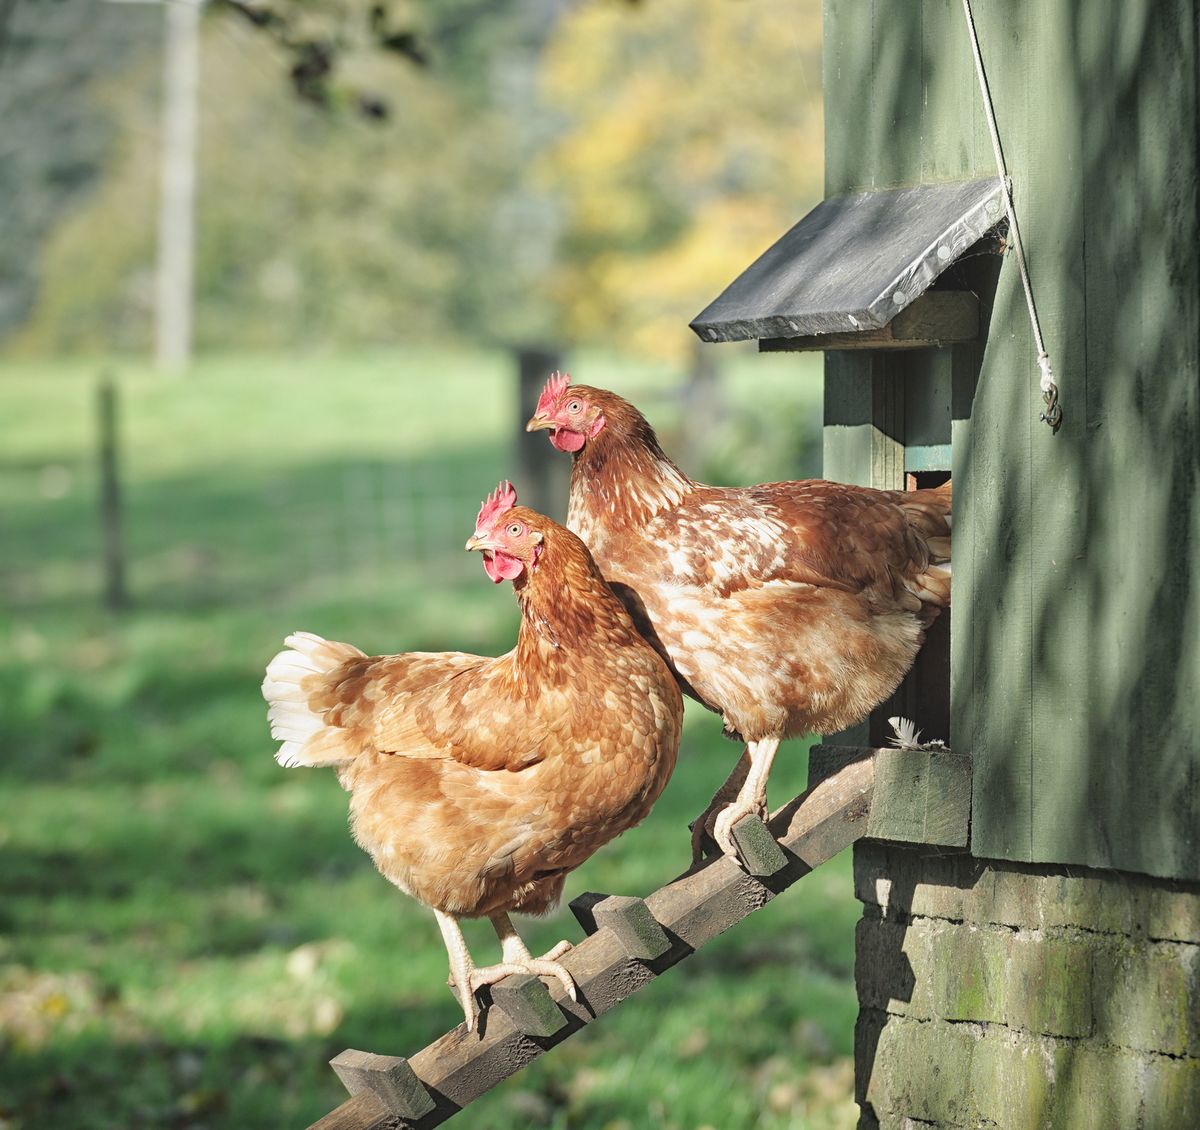 two hens standing on a wooden ladder outside their henhouse